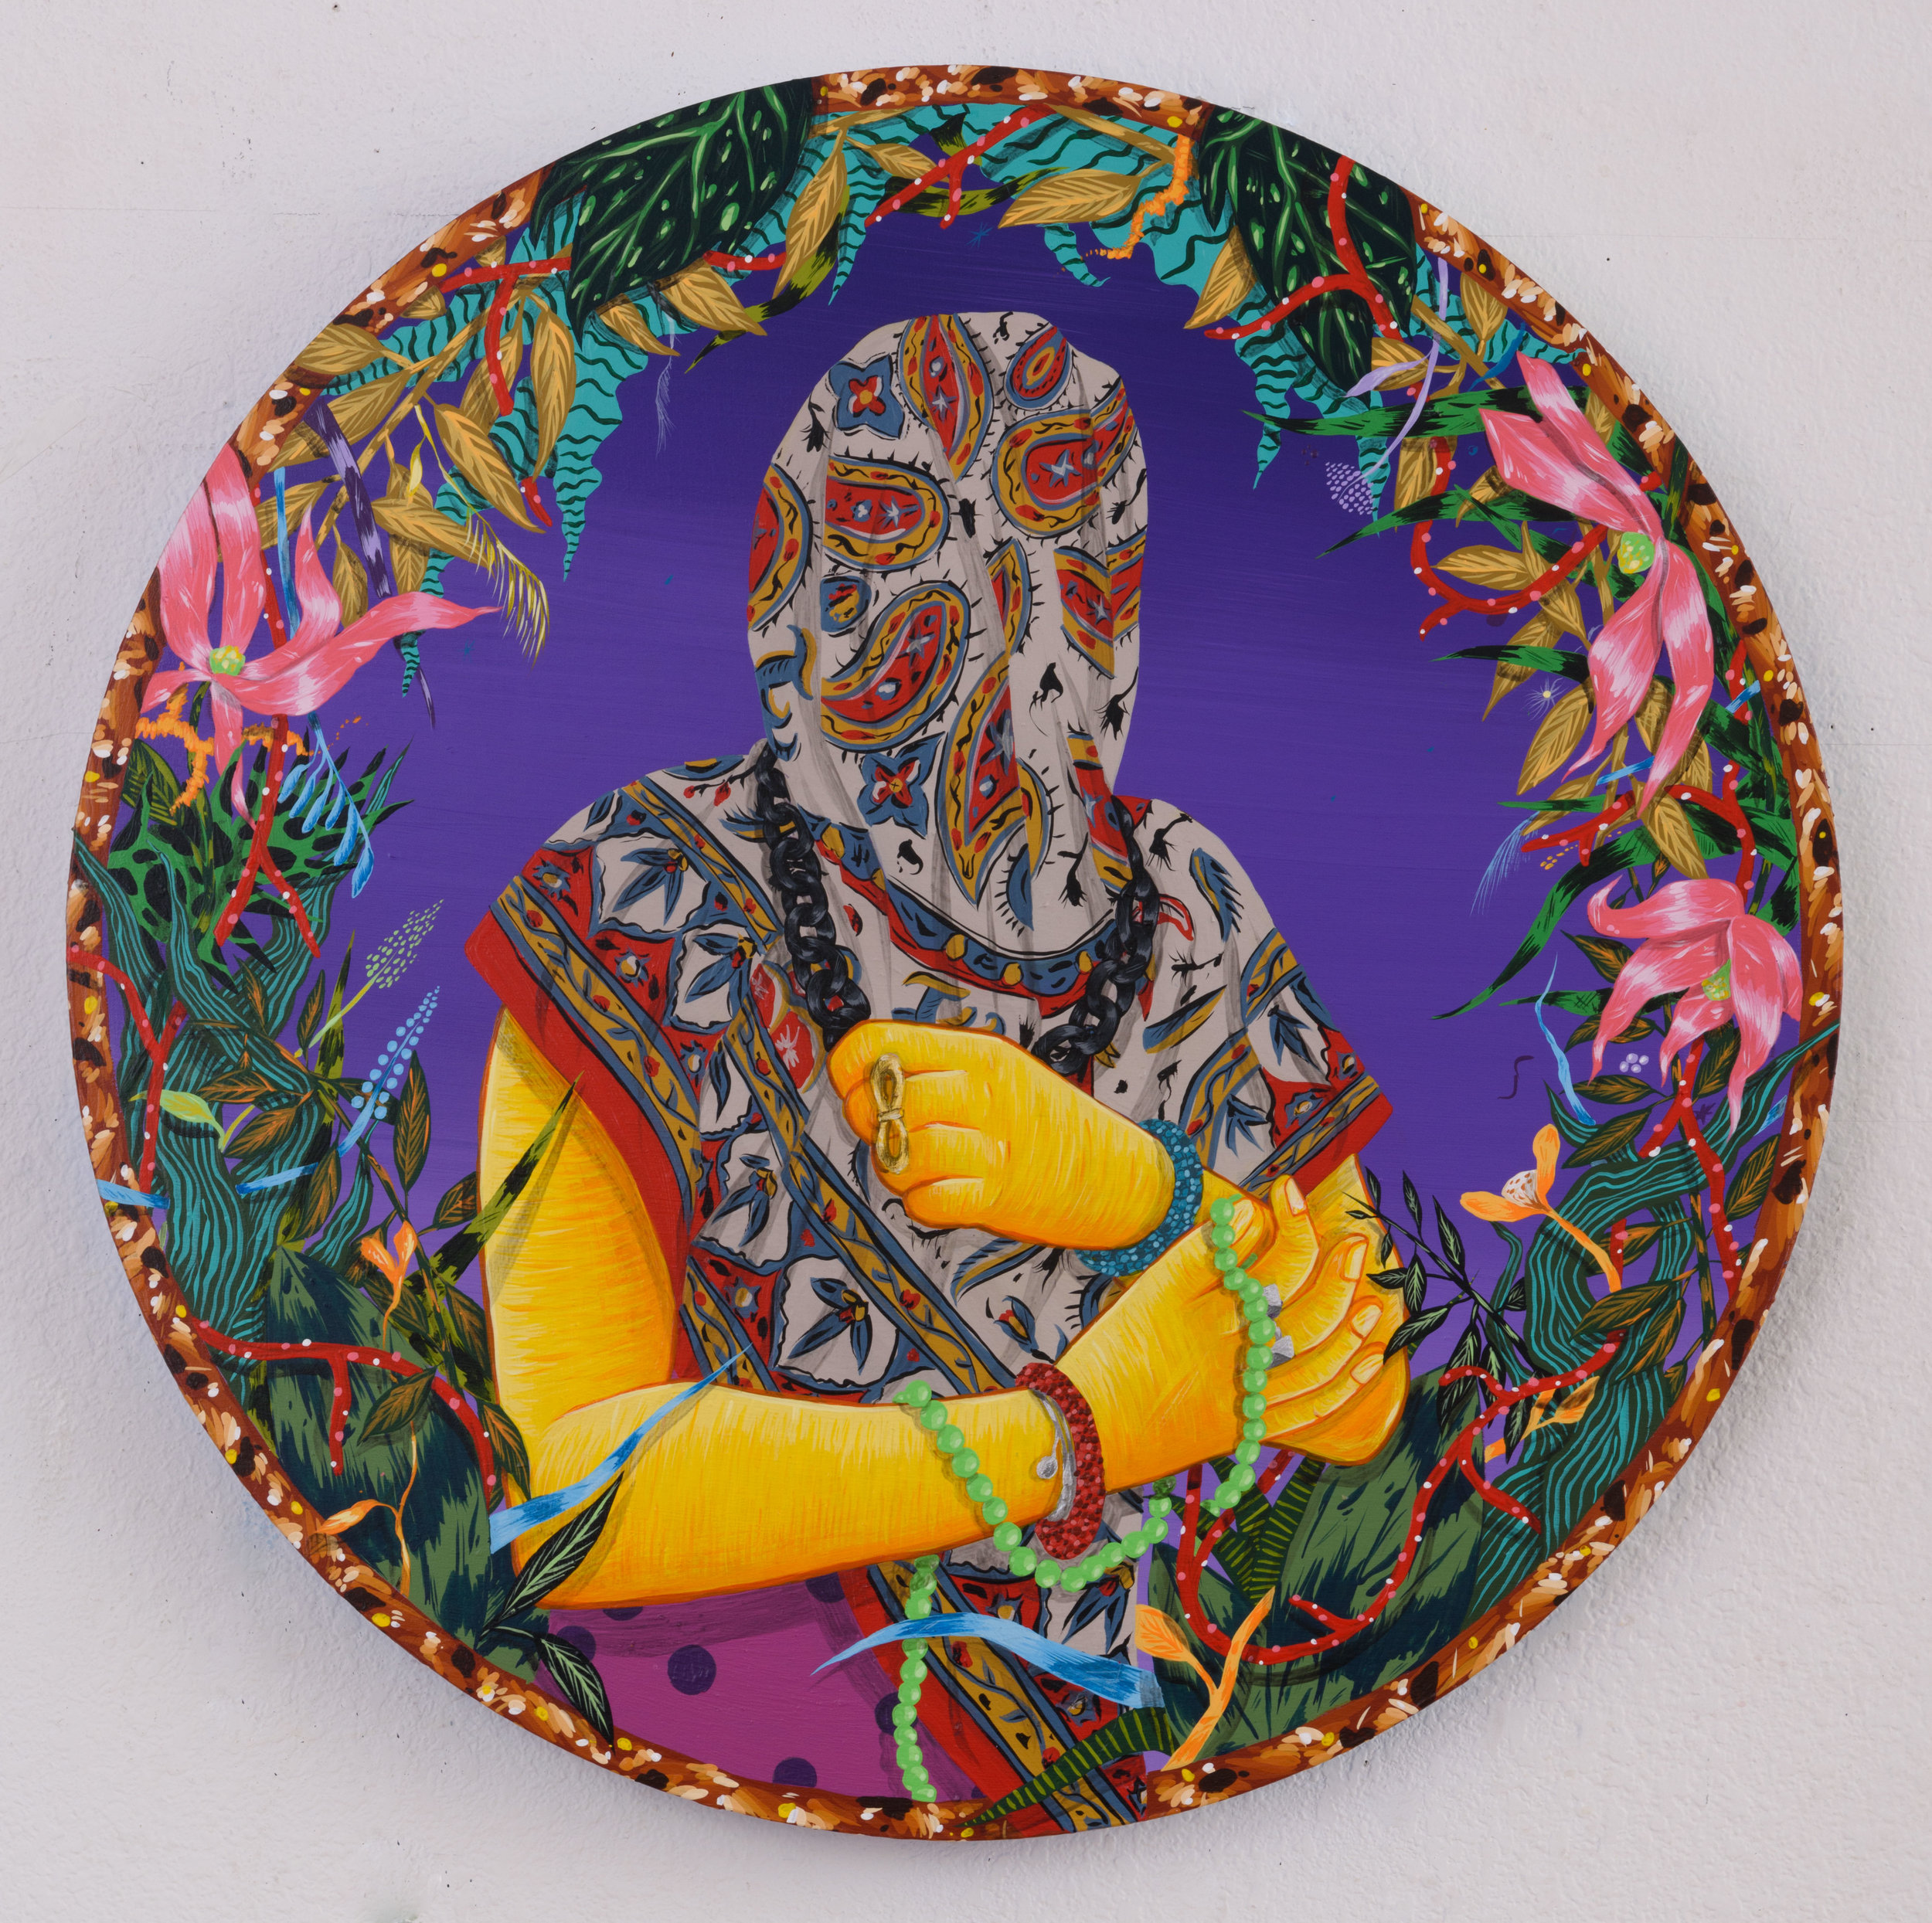 Amir H. Fallah. “Enrapt” (2017).&nbsp; Acrylic on panel. 24 INCHES IN DIAMETER. Courtesy of the Artist and Shulamit Nazarian, Los Angeles.